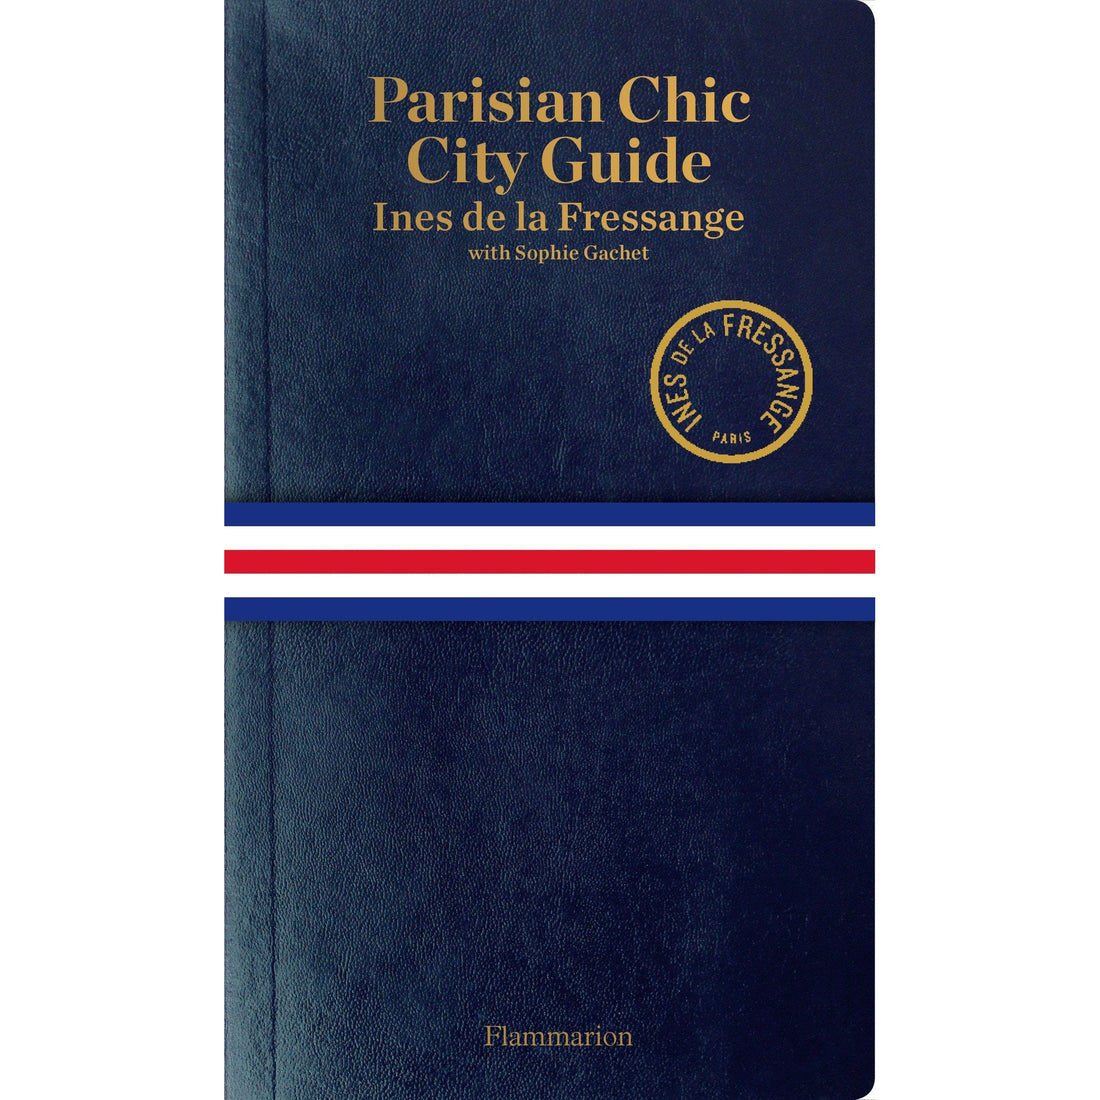 book-parisian-chic-city-guide-shopping,-dining-and-more- (1)